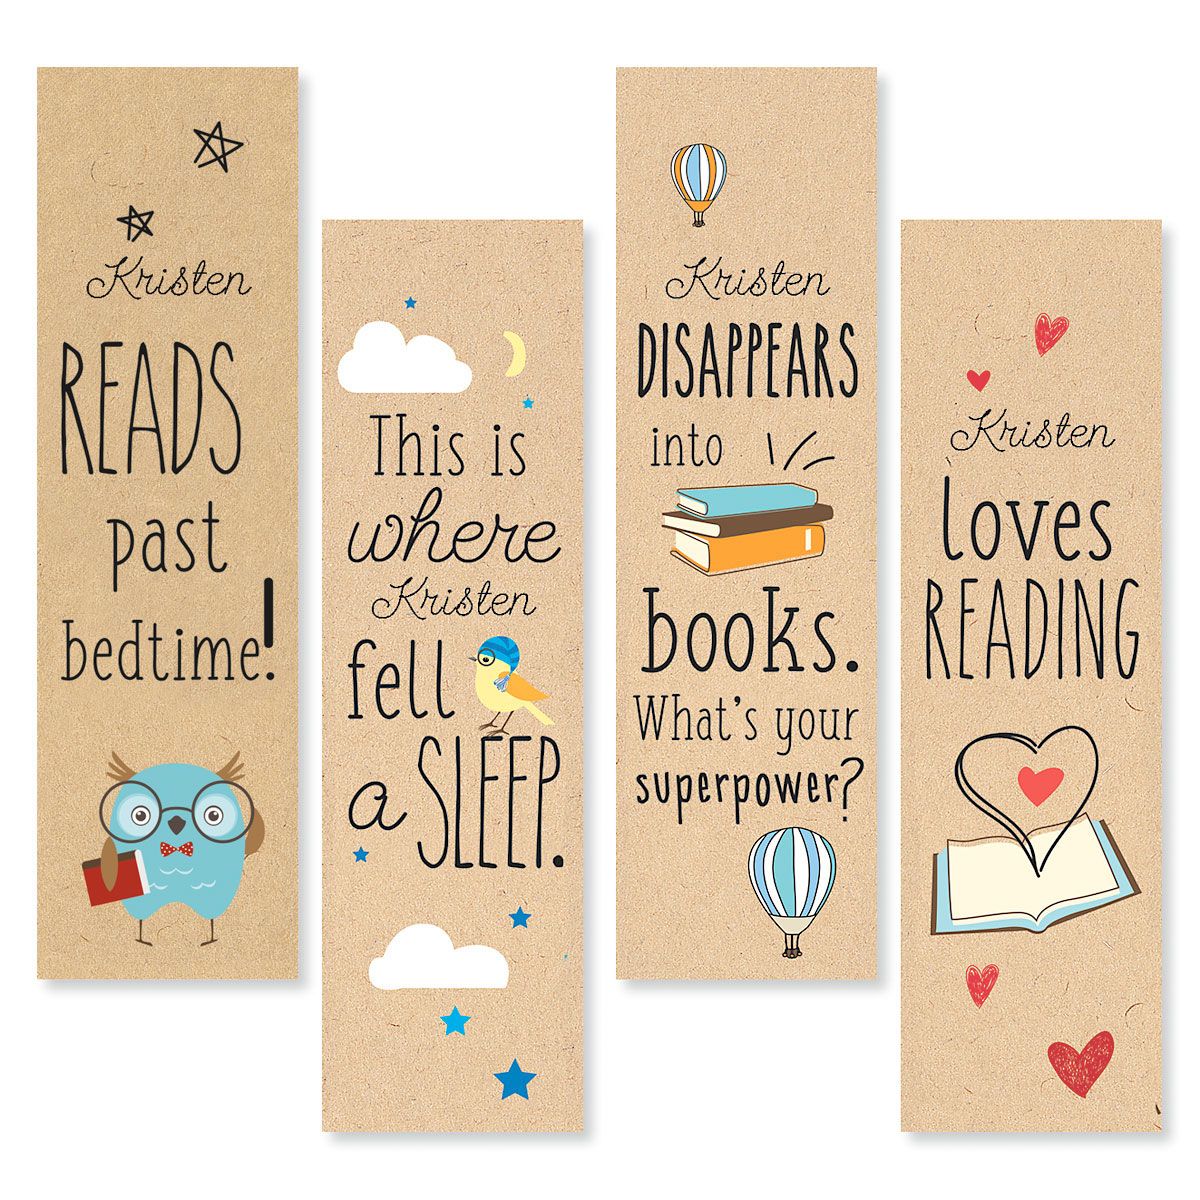 Die-Cut Personalized Reading Bookmarks | Current Catalog